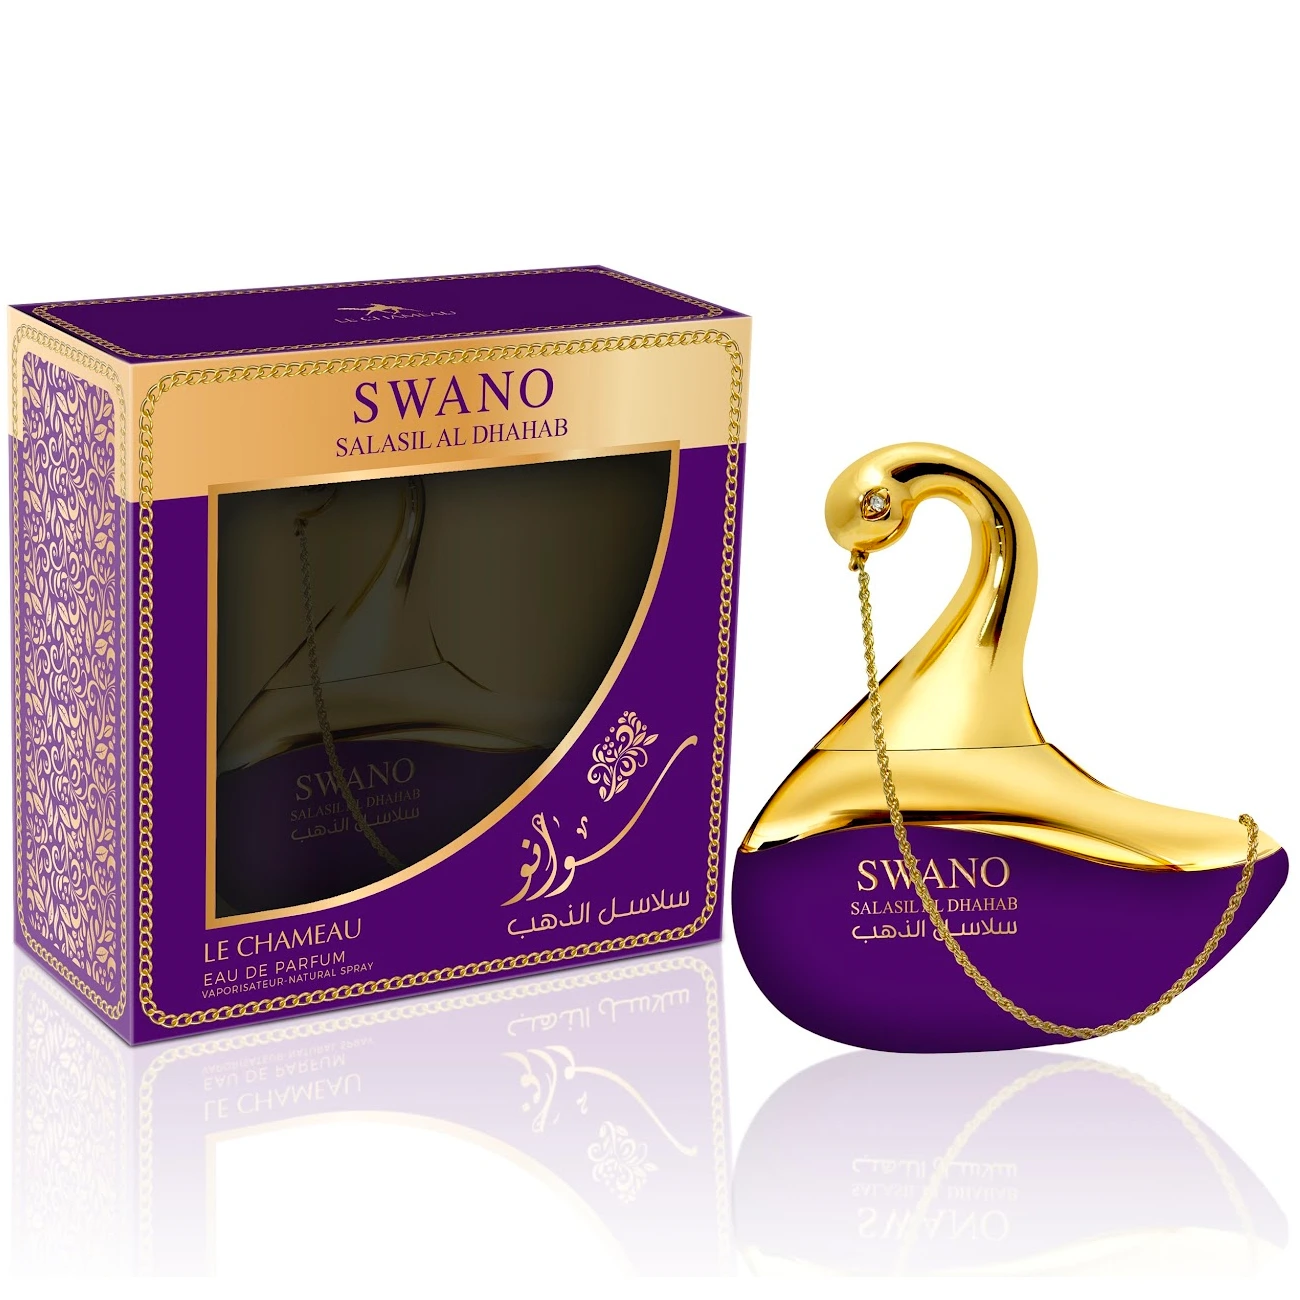 <p data-mce-fragment="1">Swano Salasil 2.7 oz EDP for women is an enchanting fragrance, skillfully crafted to captivate with its majestic mix of woody and musky notes, expertly blended with the elegance of golden swans. The rich top notes of blackcurrant, mid notes of Mary Rose and Freesia, and the base of ambroxan, patchouli, and woody notes will surround you in elegance.</p>